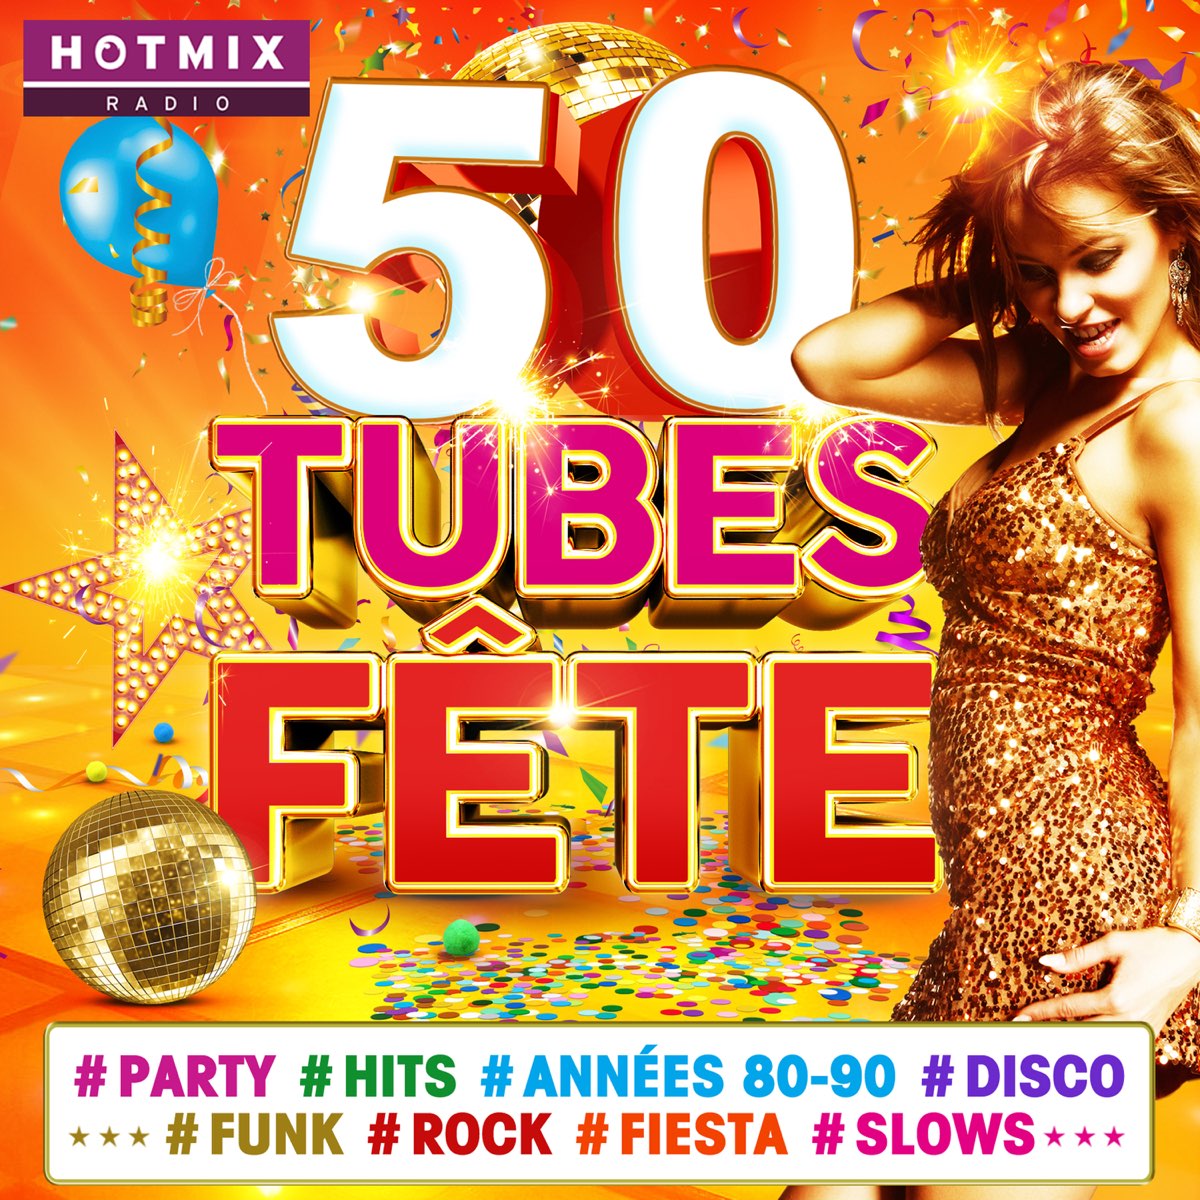 50 Tubes Fête #Party #Hits #Années 80-90 #Disco #Funk #Rock #Fiesta #Slows  (by Hotmixradio) by Various Artists on Apple Music